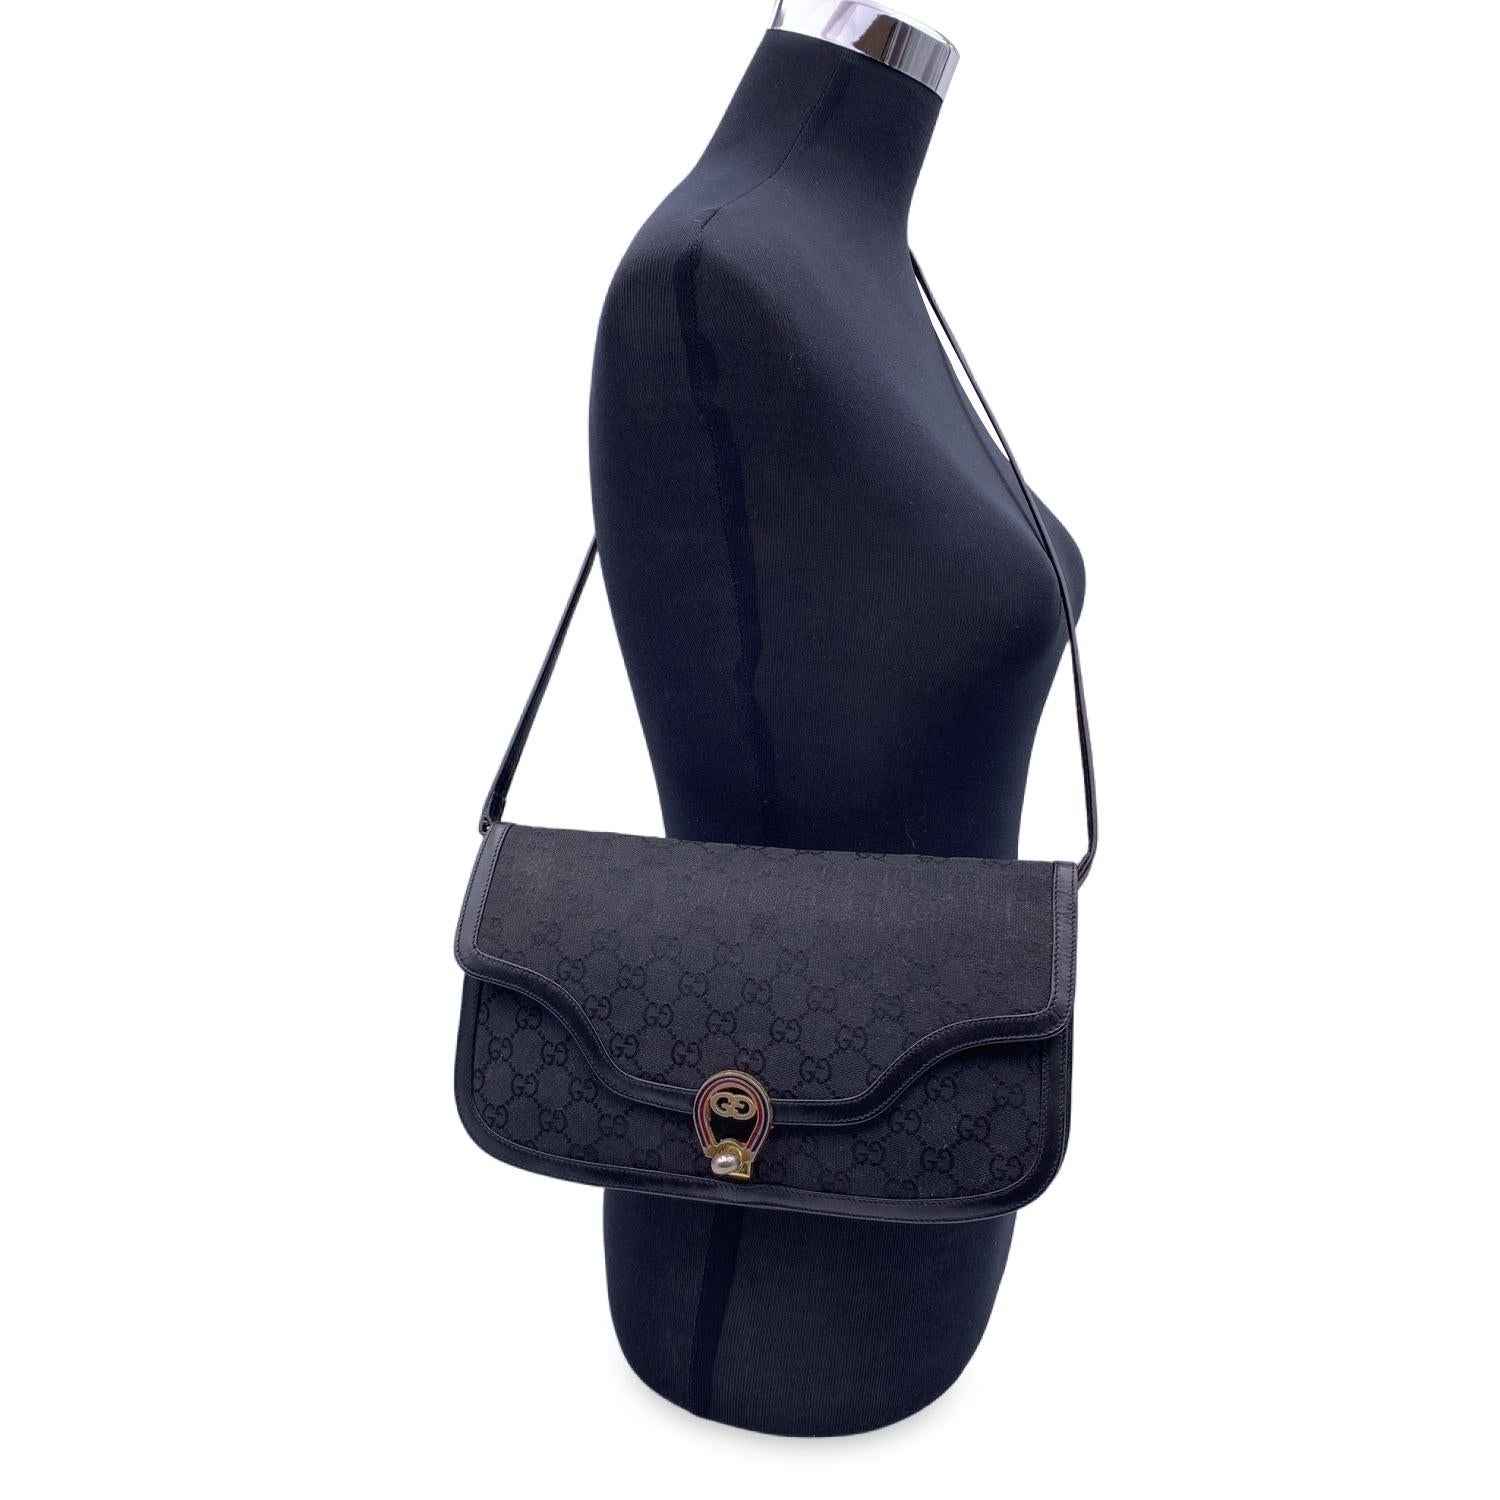 Gucci vintage shoulder bag in black monogram canvas with black leather trim and shoulder strap. GG - Gucci logo on the front with red and green enamels. Convertible model. It can be used as a shoulder bag or as a clutch purse if you remove its